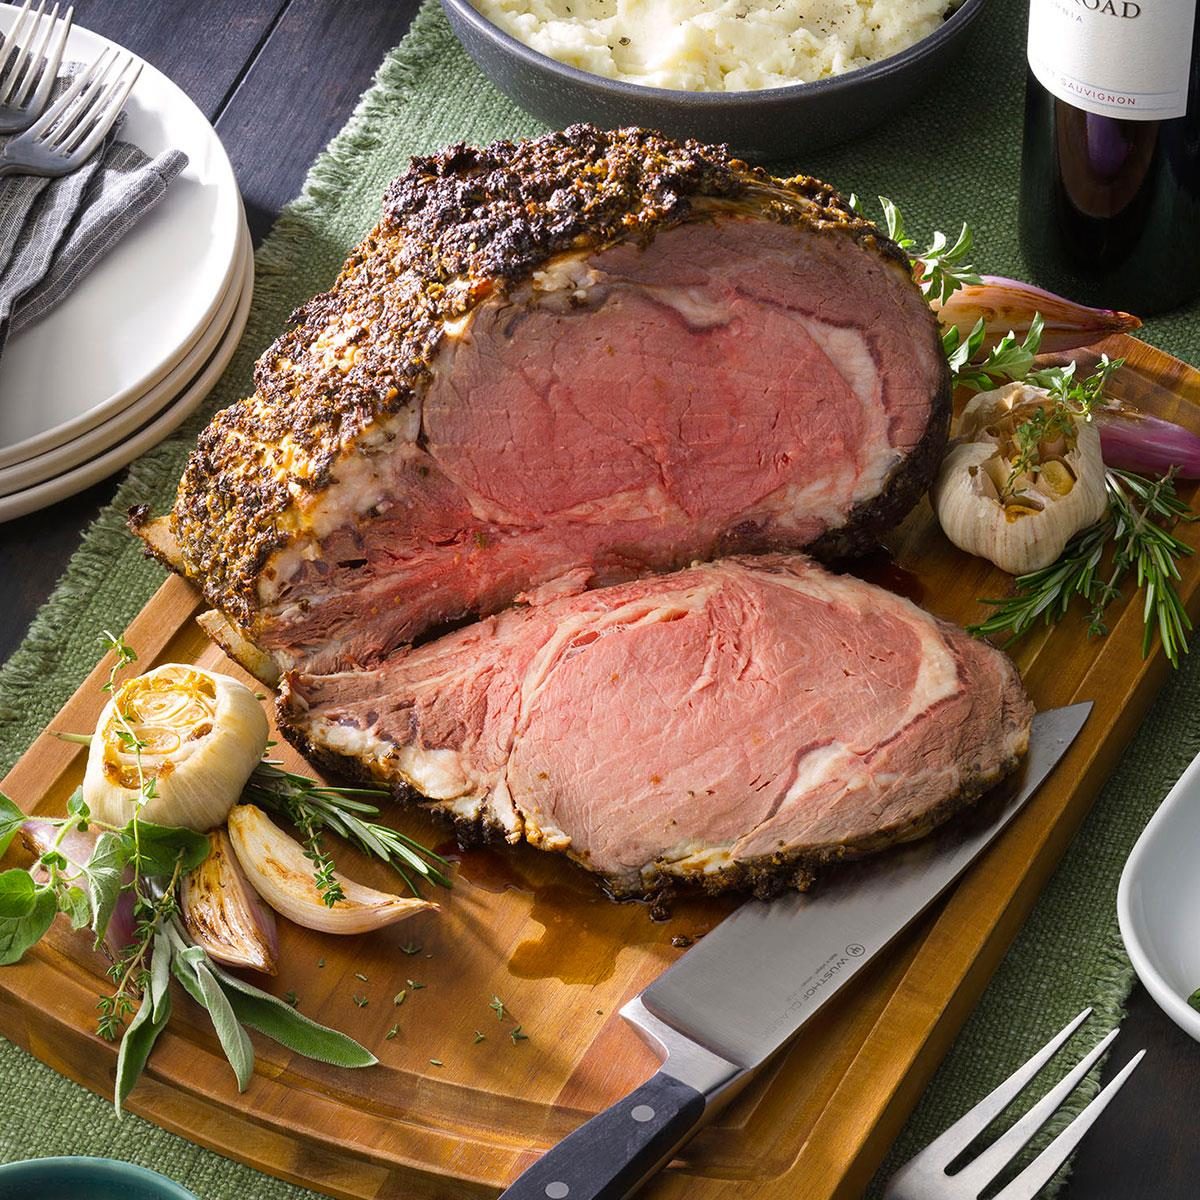 https://www.tasteofhome.com/wp-content/uploads/2018/01/Herb-Crusted-Prime-Rib_EXPS_RDPDCTOHX23_42237_P3_GNS_10_05_8b.jpg?fit=700%2C1024